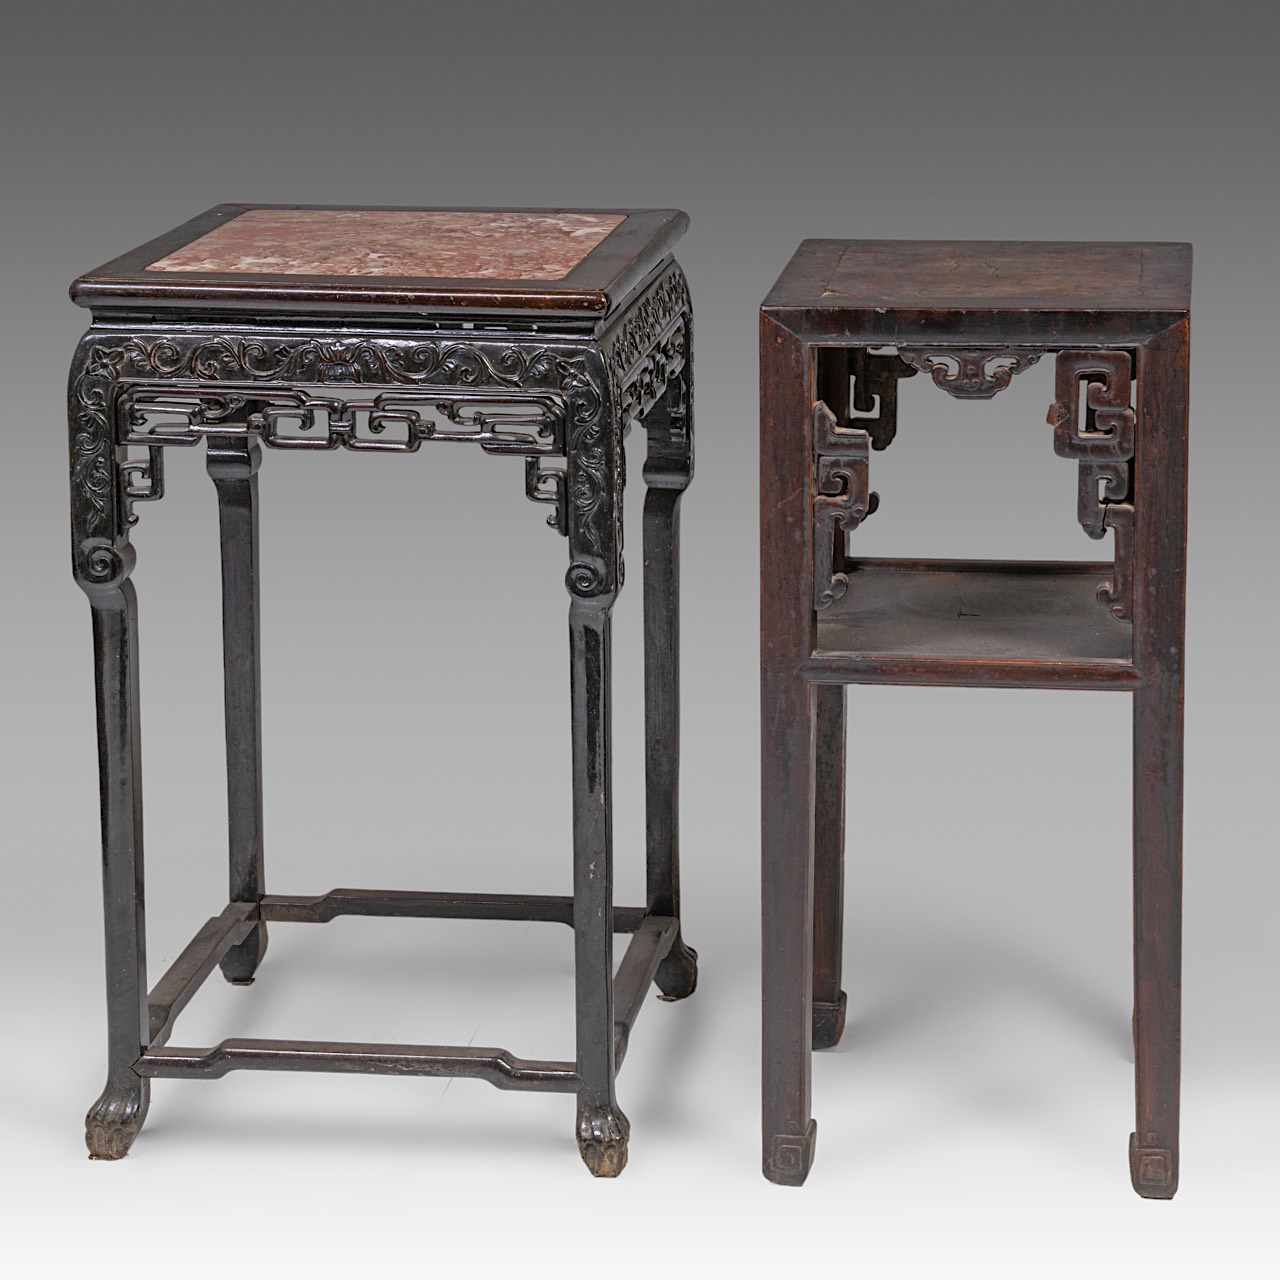 Two South-Chinese carved hardwood bases, one with a marble top, late Qing, largest H 82 - 48 x 48 cm - Image 2 of 7